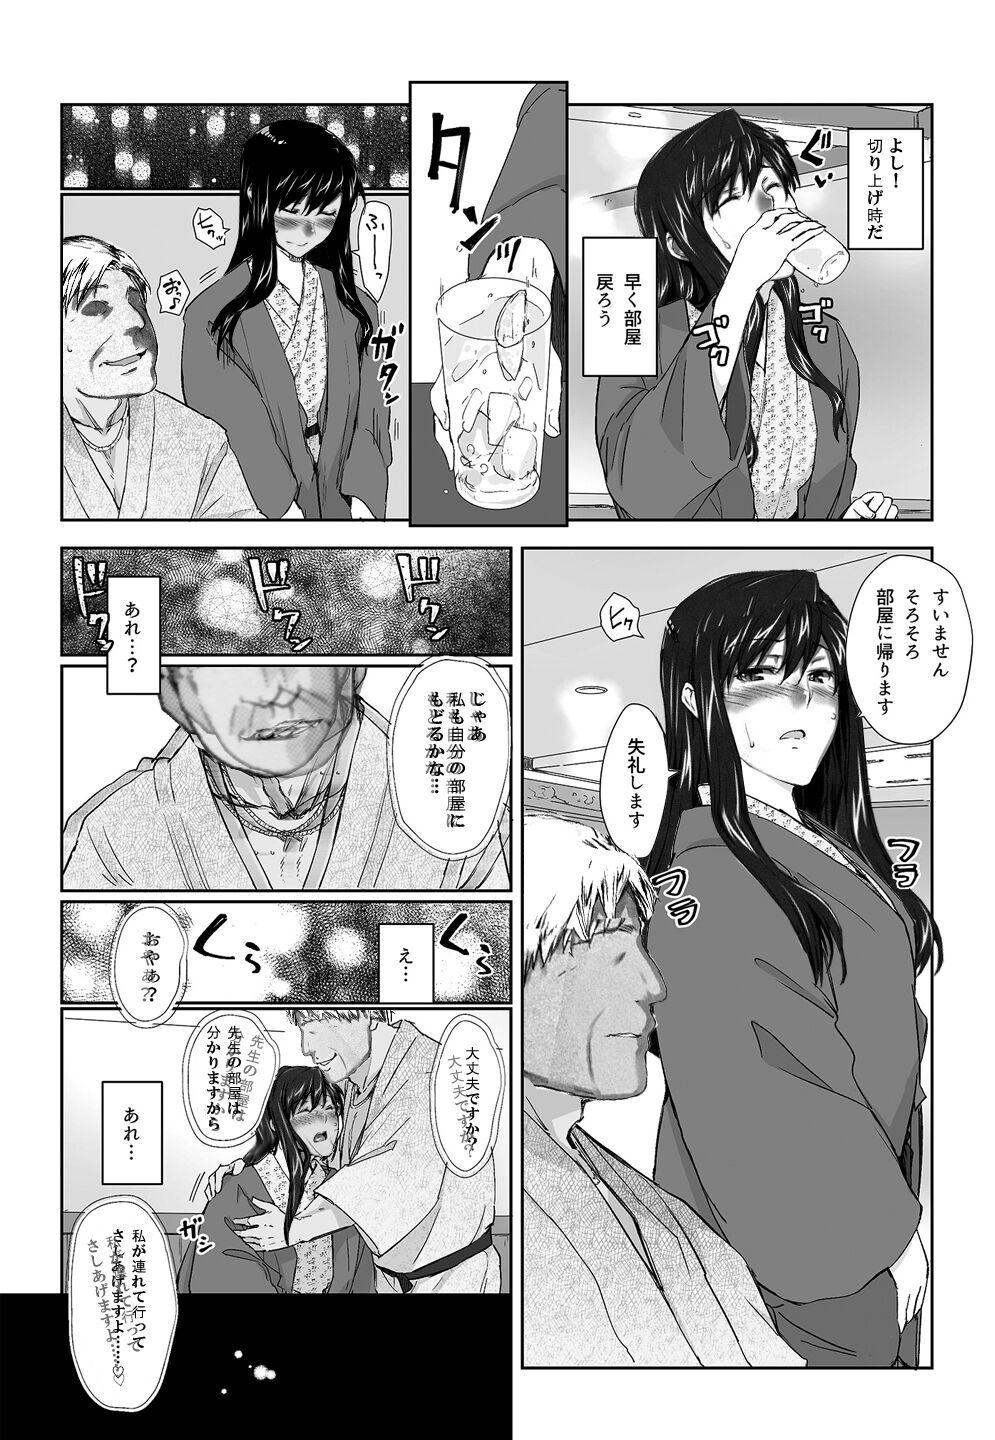 Gaygroupsex Sakiko-san in delusion Vol.8 revised ~Sakiko-san's circumstance at an educational training Route3~ (collage) (Continue to “First day of study trip” (page 42) of Vol.1) Gay Brownhair - Page 5